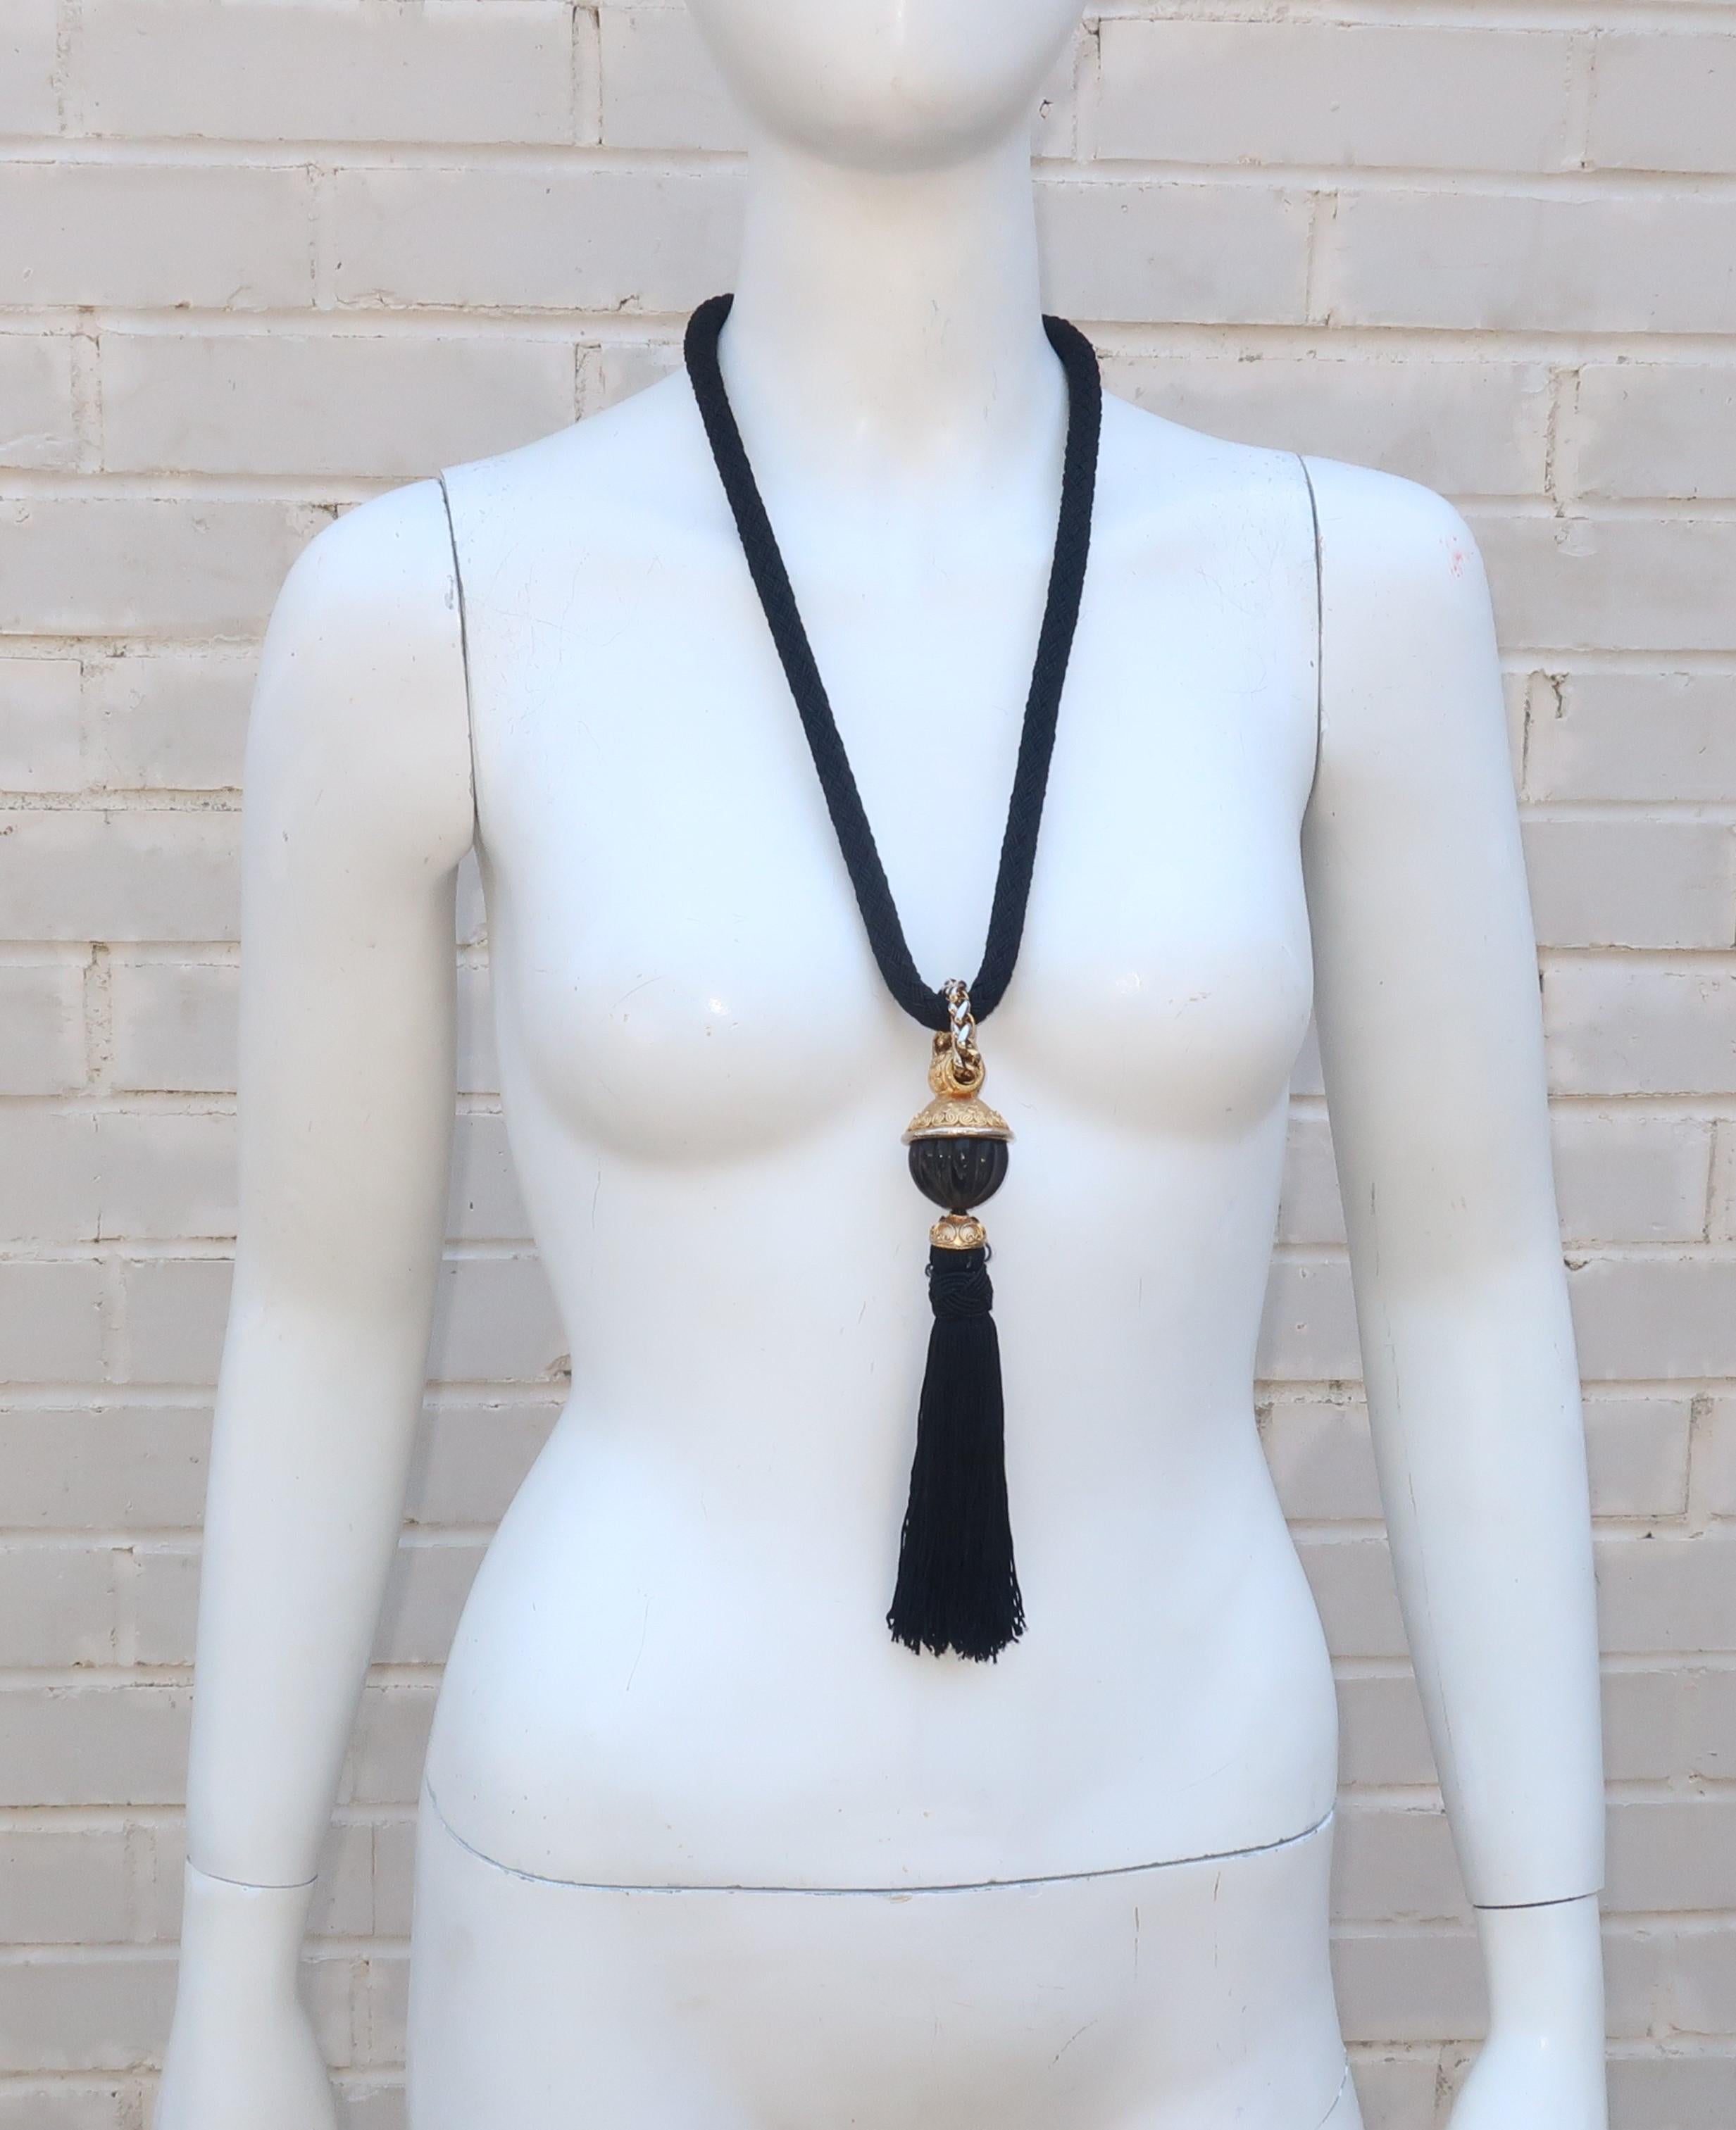 This 1970's piece is a fashionable two-for-one ... a necklace for some occasions with a quick change to a belt for other looks.  The braided black silk 'rope' is perfectly at home around the neck or at the waist with a chunky tasseled medallion